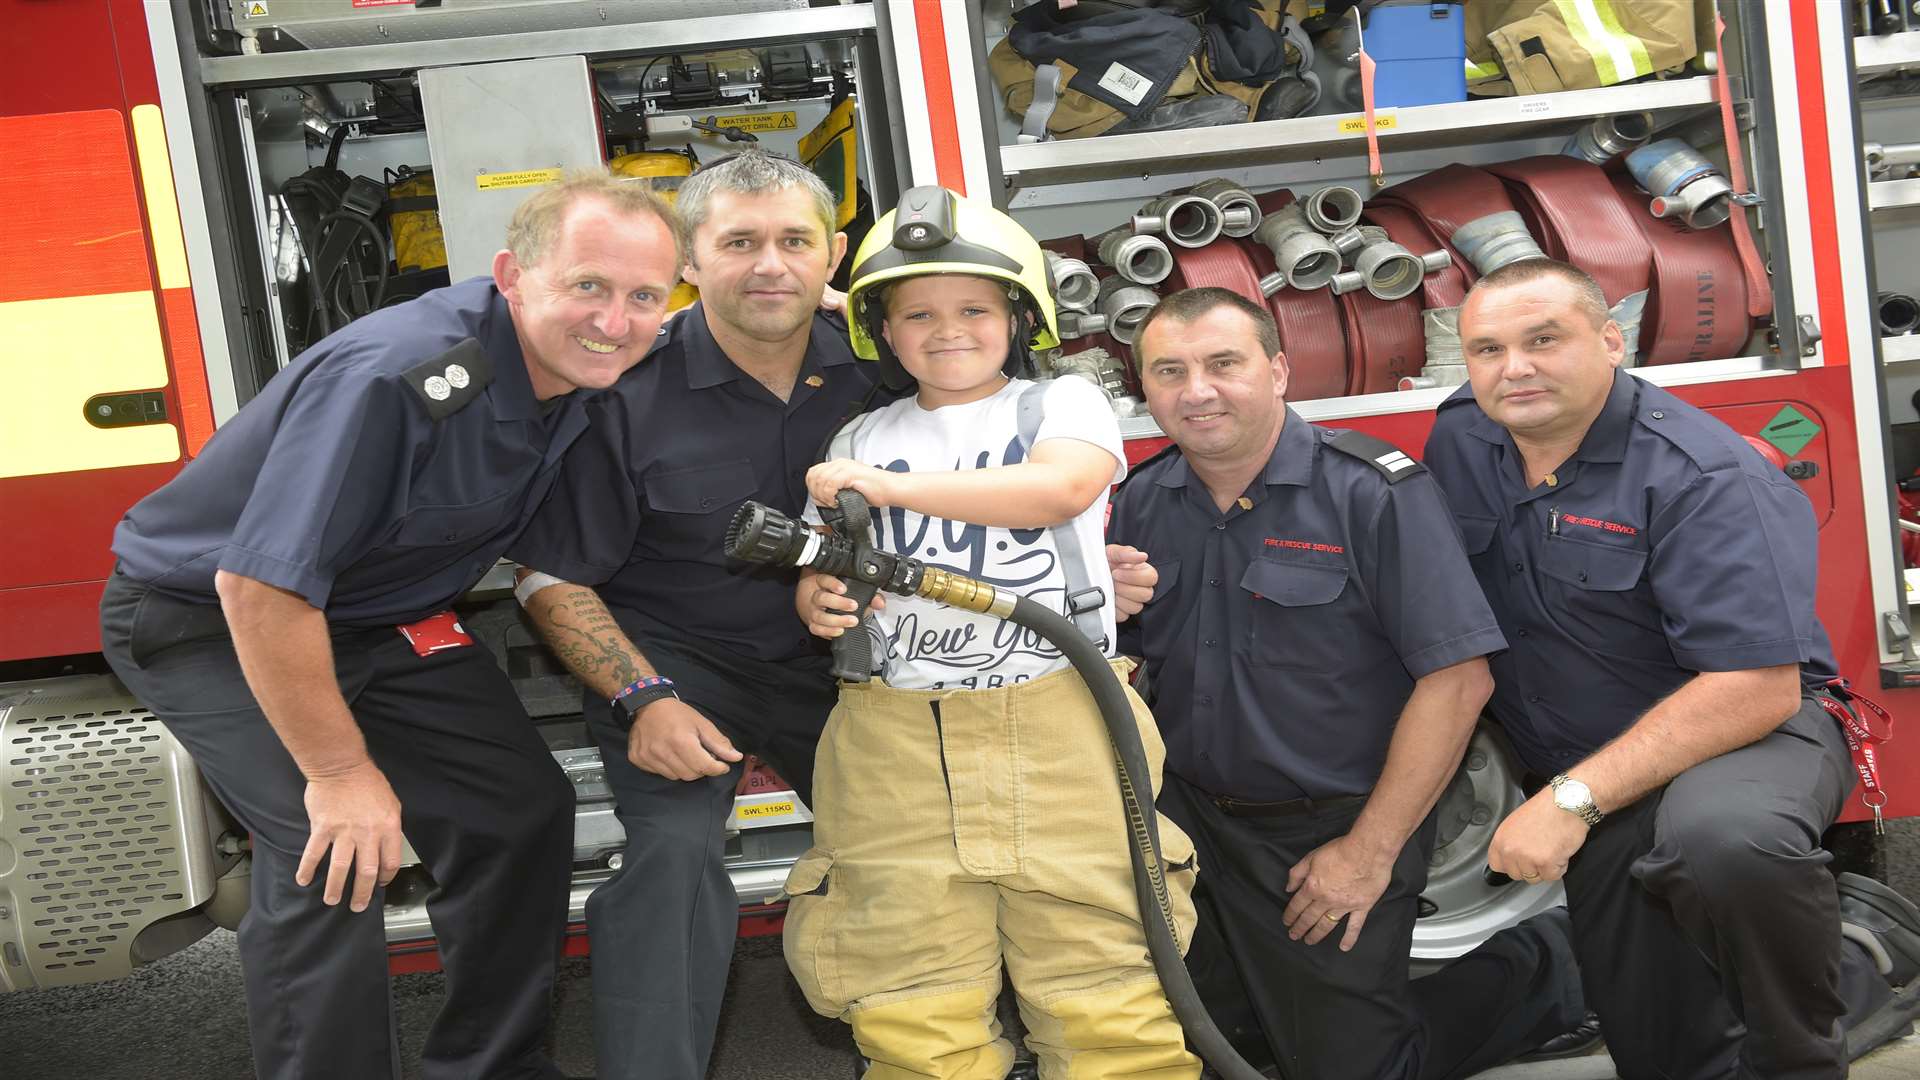 Aylesham celebrates ninety years. Nine year-old Jake Walford, spends time with the village firefighters